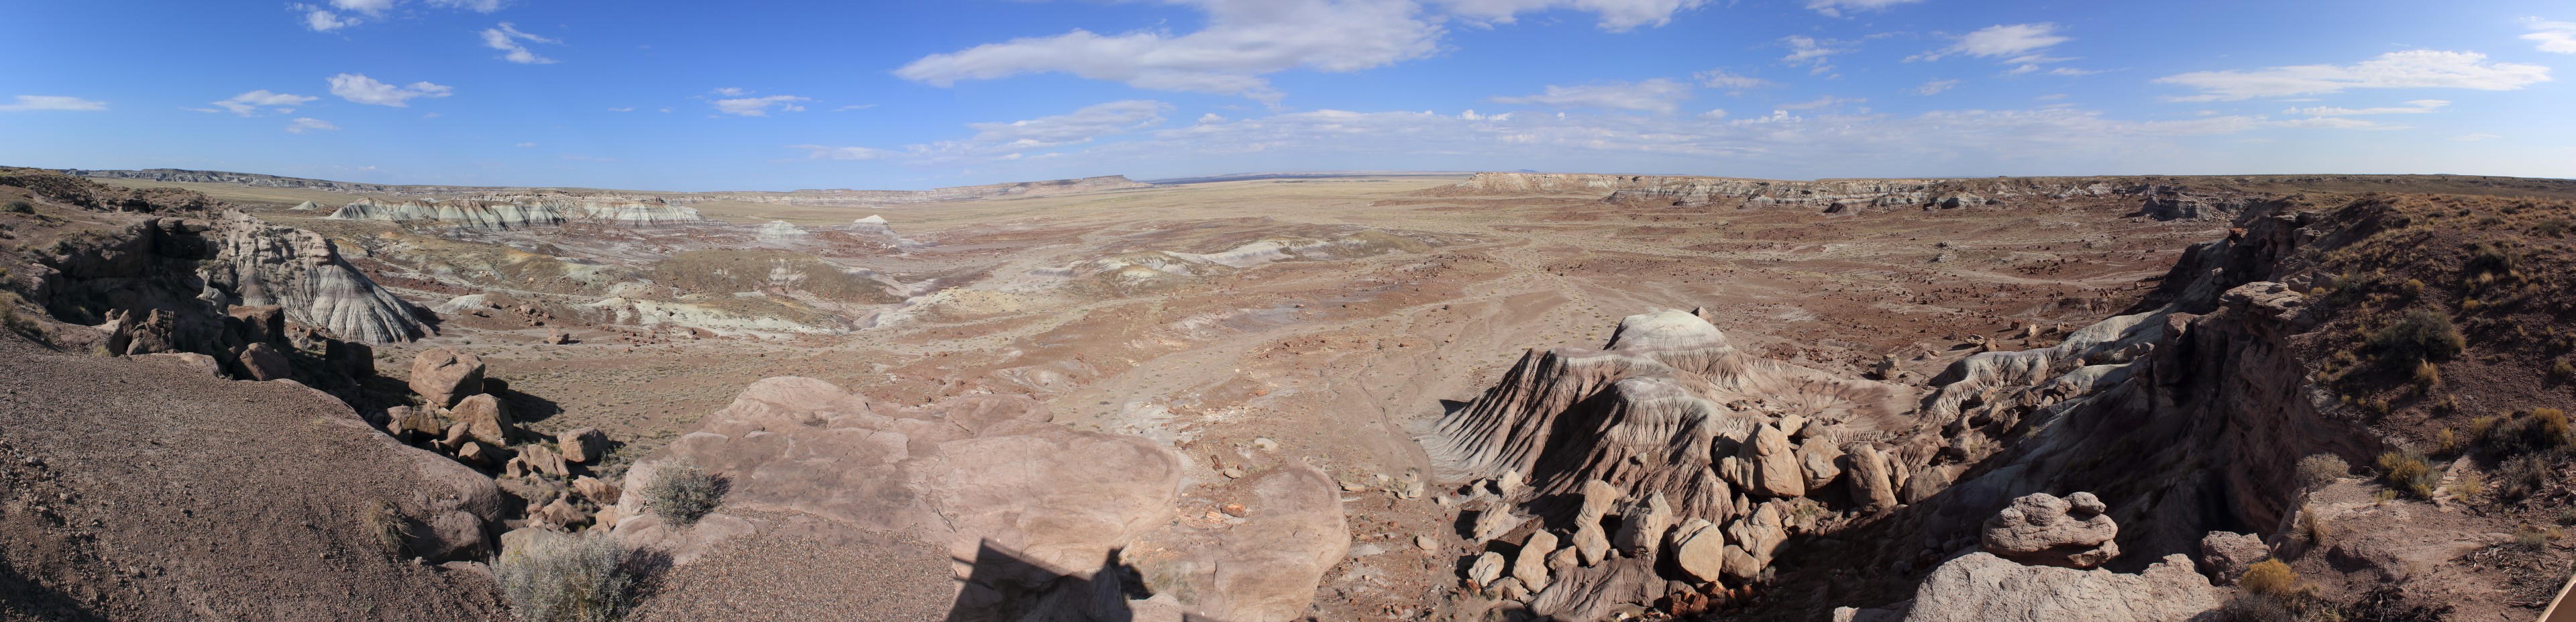 The Jasper Forest. A view into a valley cut into the main plateau of the park. It expands out into the Painted Desert, but also contains a jumble of petrified logs.